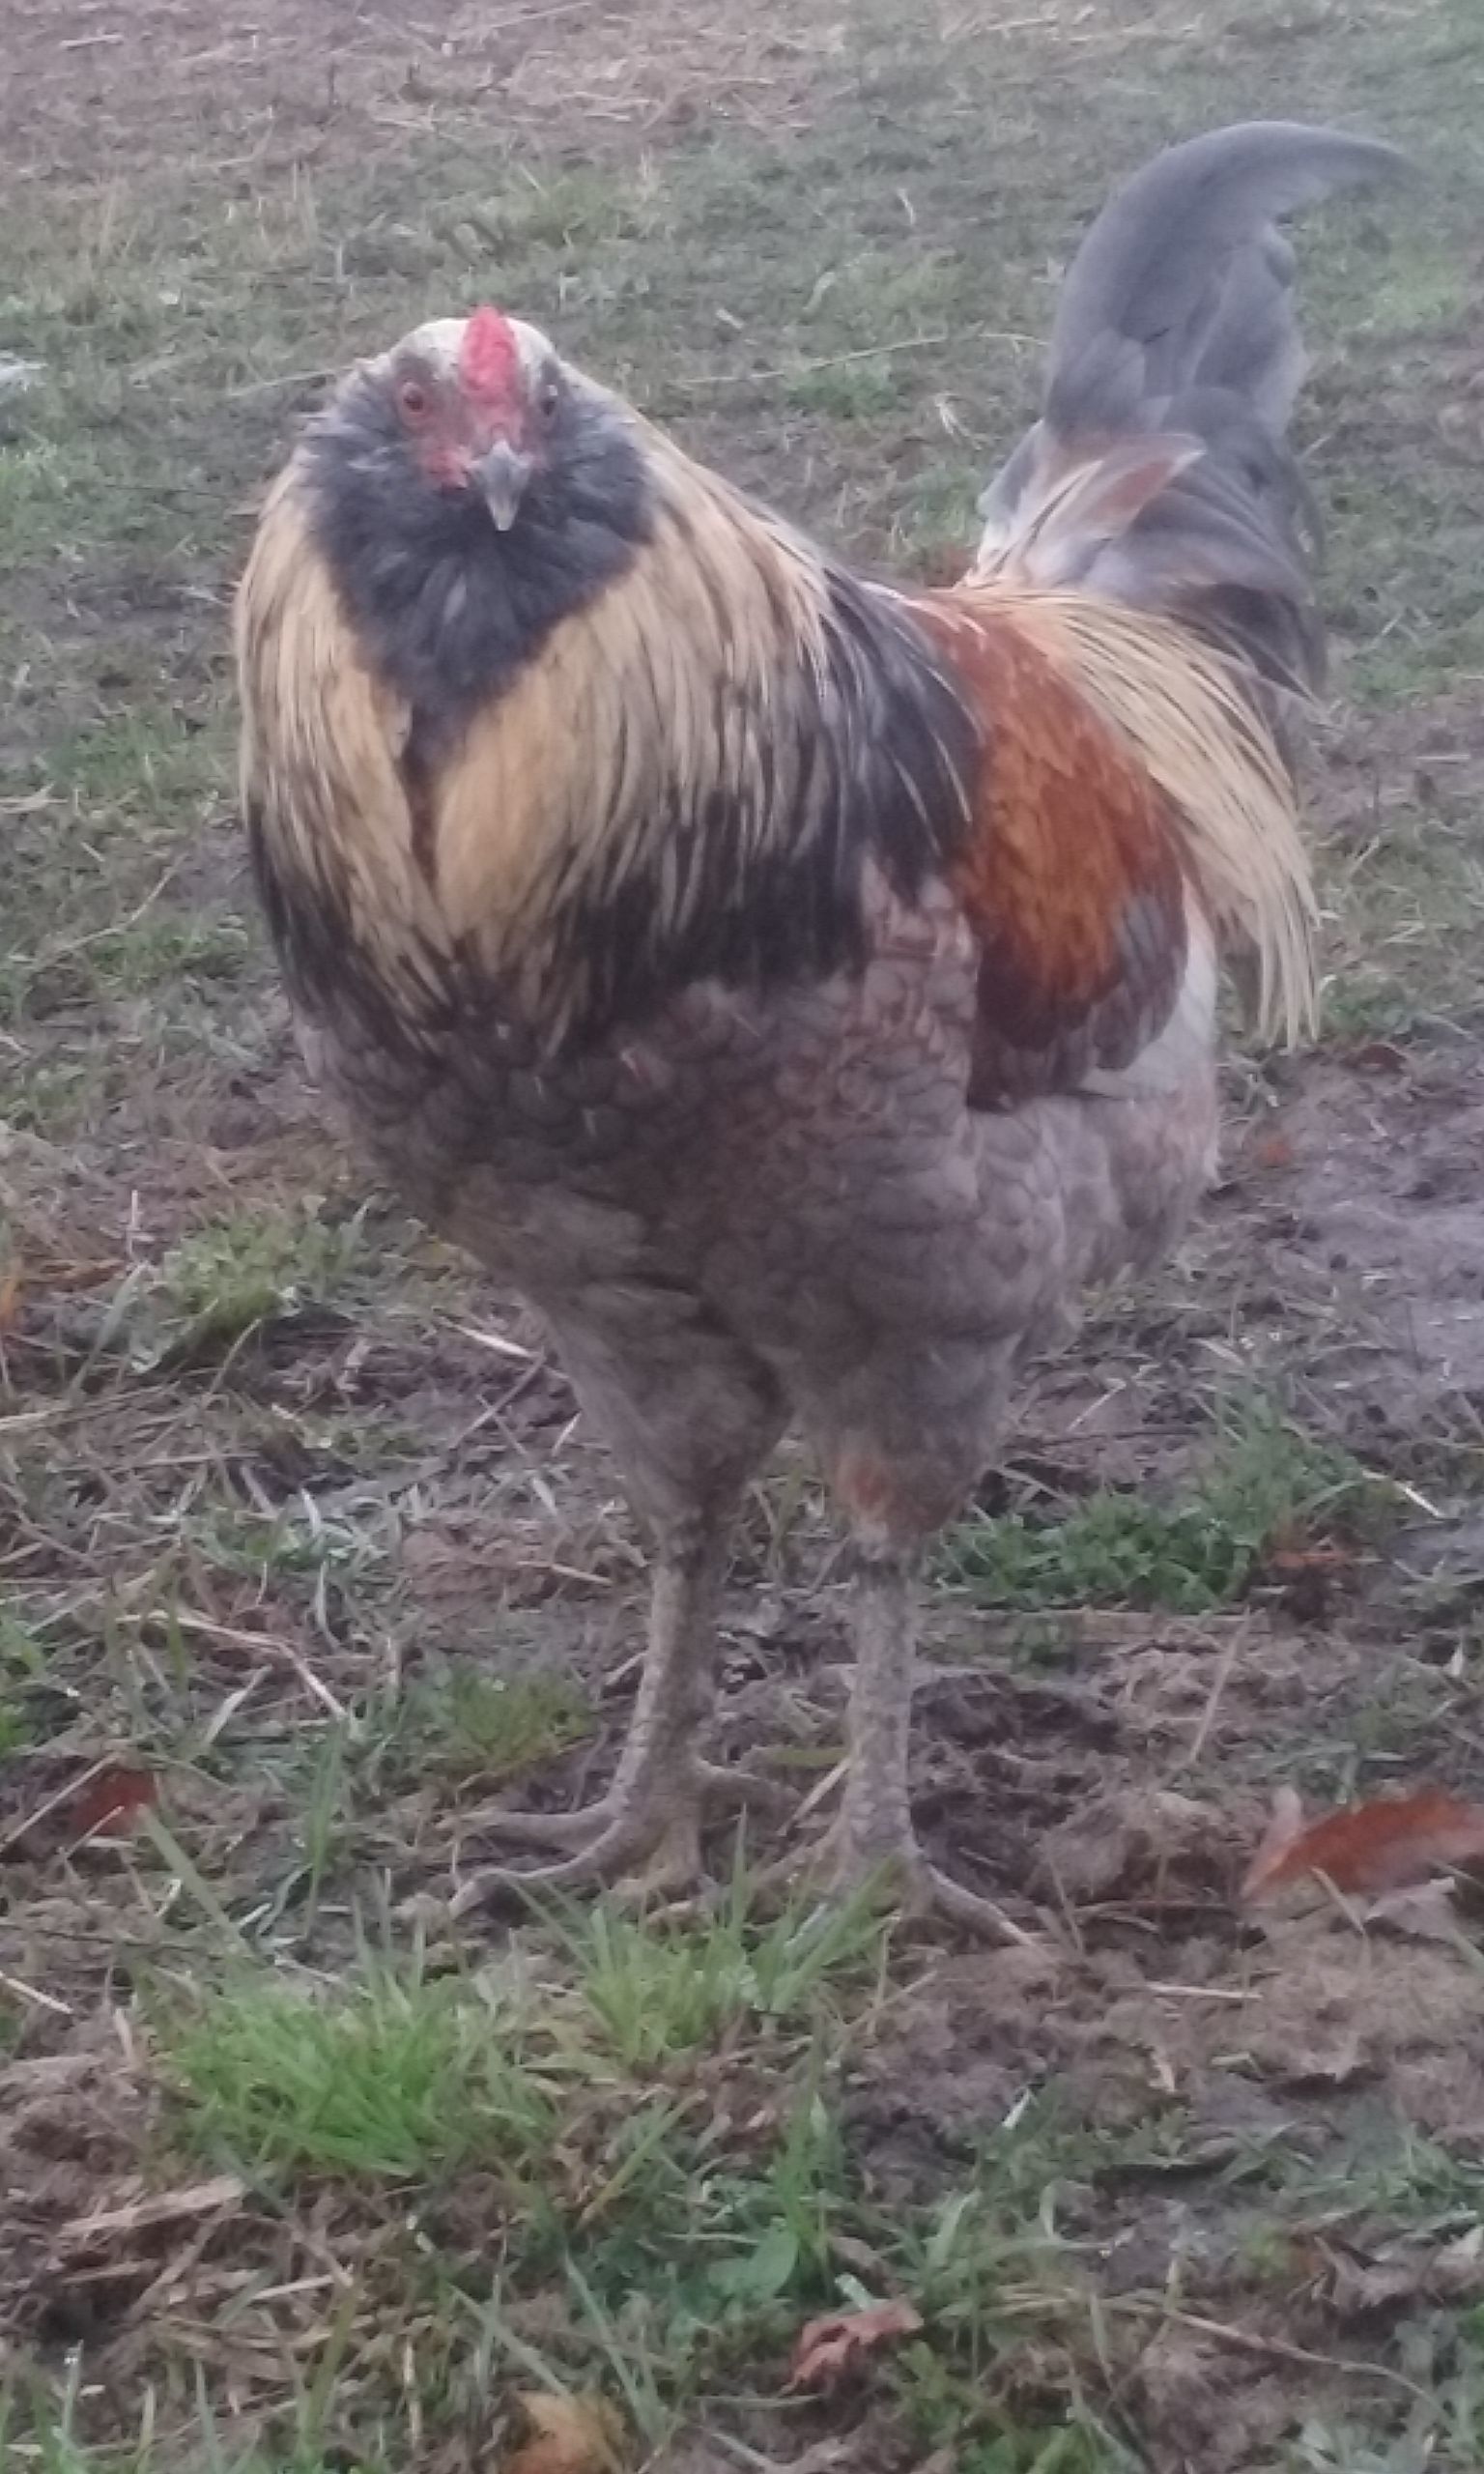 Our rooster "Crooky".